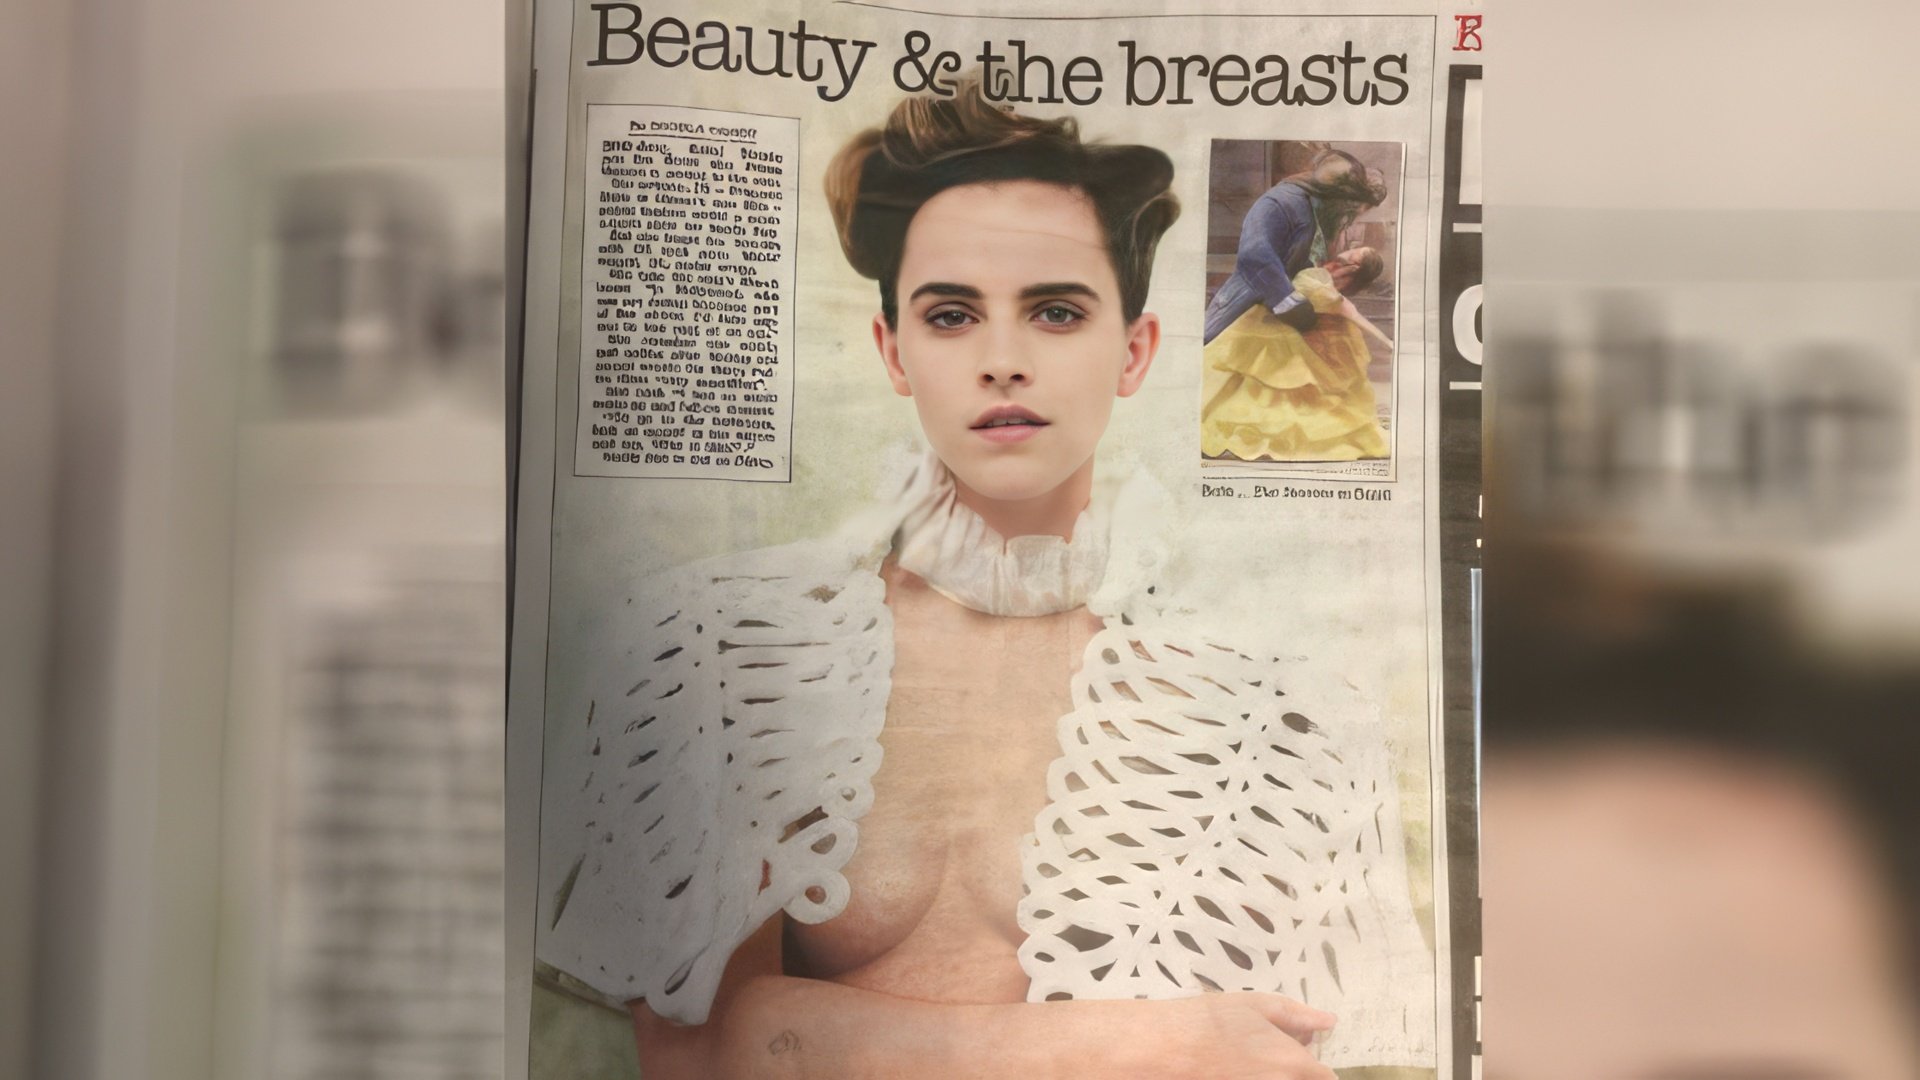 A photo of Emma Watson with bare breasts provoked anger among feminists